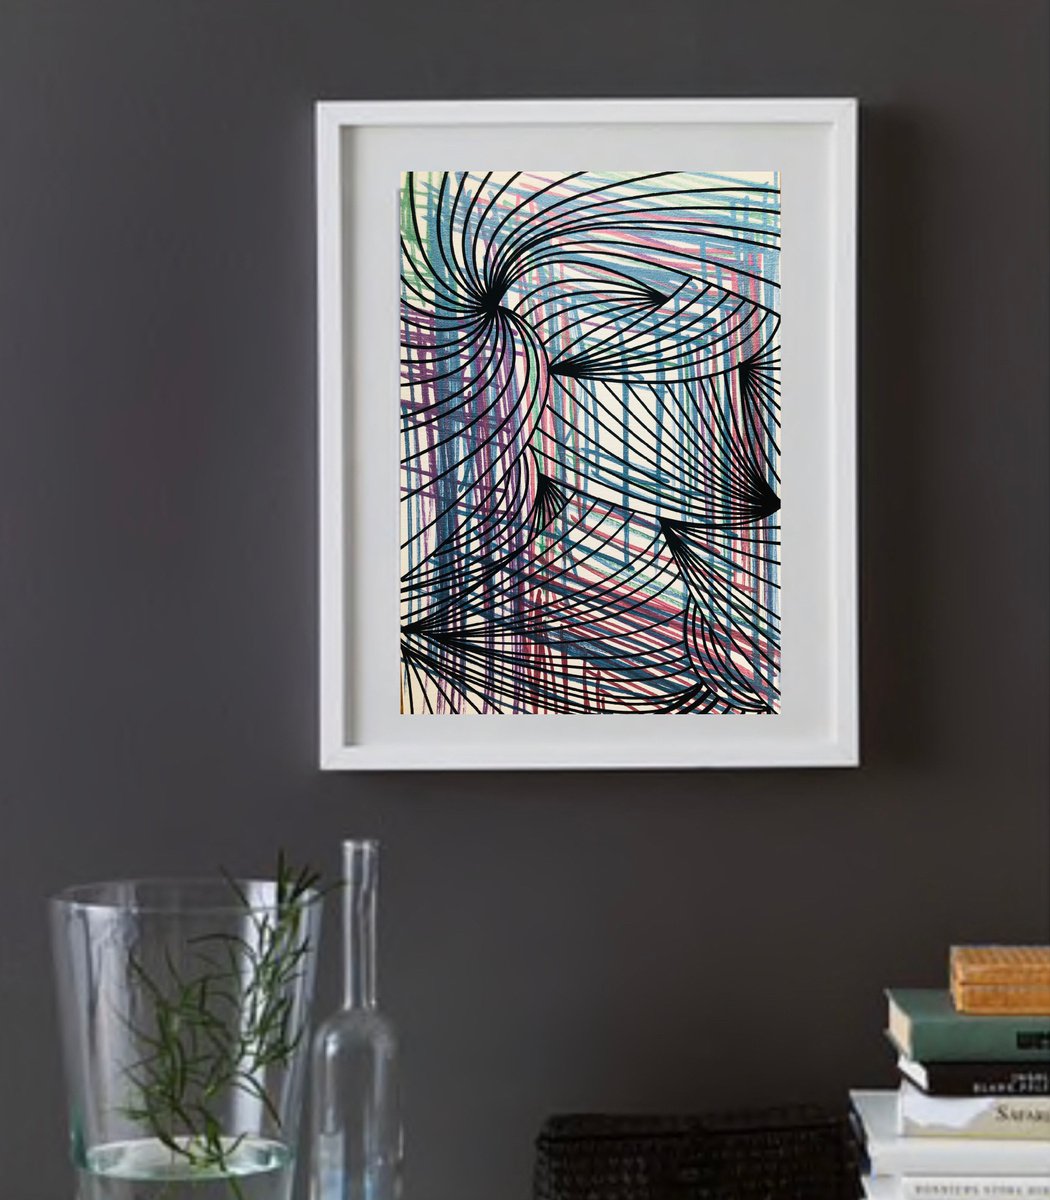 Debut 49 - Abstract Optical Art - Black and Metallic by Elena Renaudiere